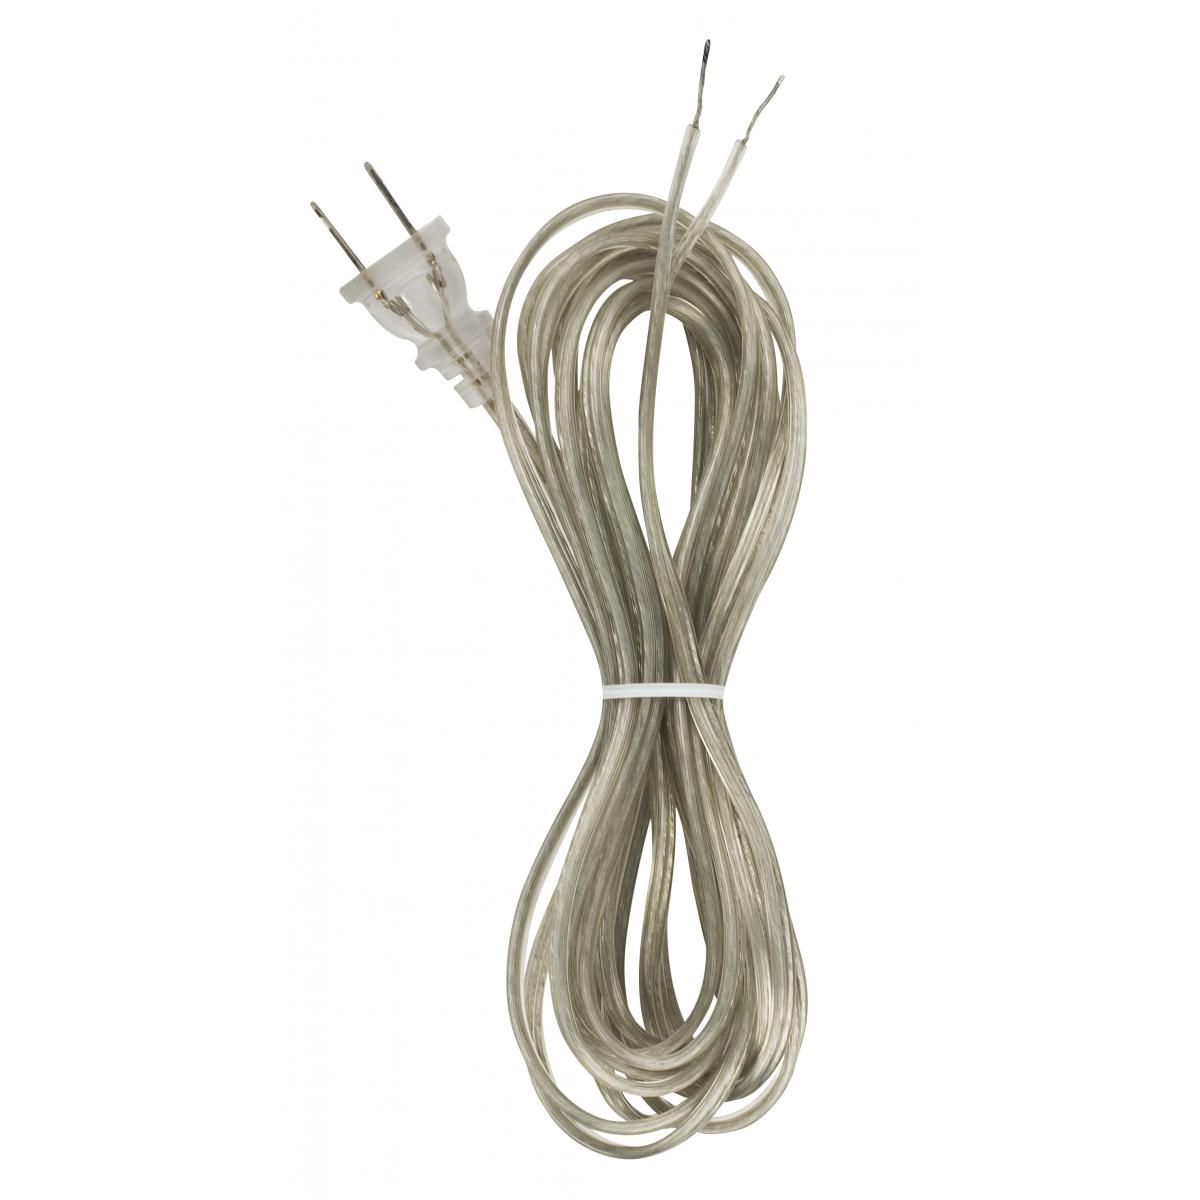 90-1532 15' CLEAR SILVER CORD SET SPT-